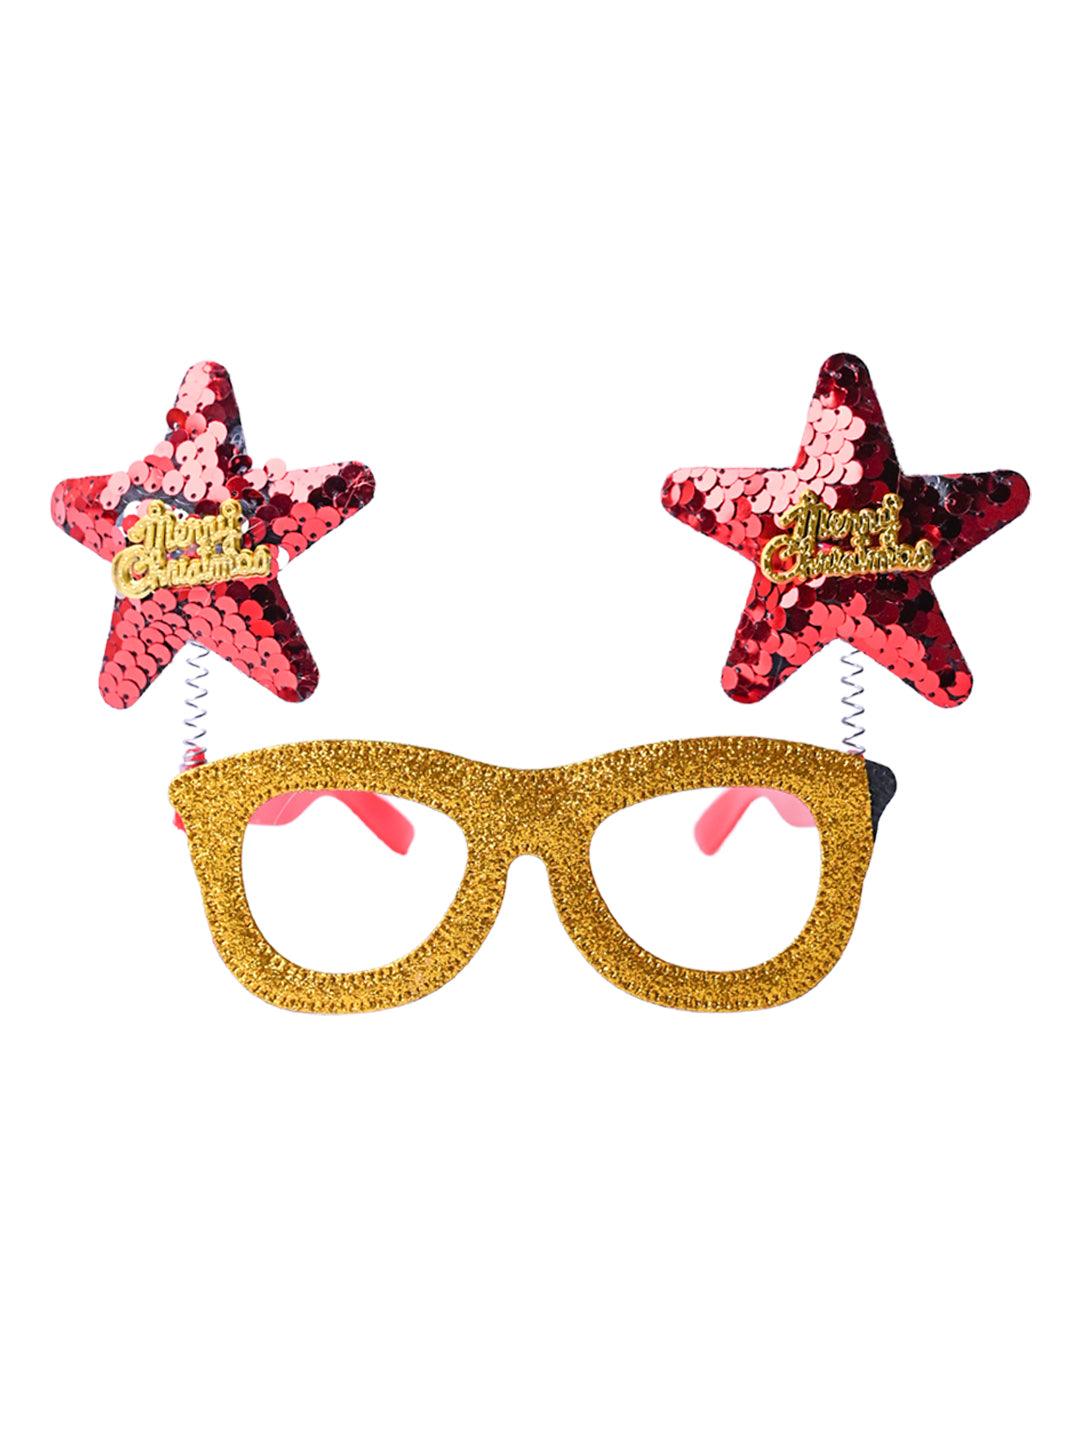 Party Spectacles With Reindeer Horns (Gold, Set Of 2) - MARKET99